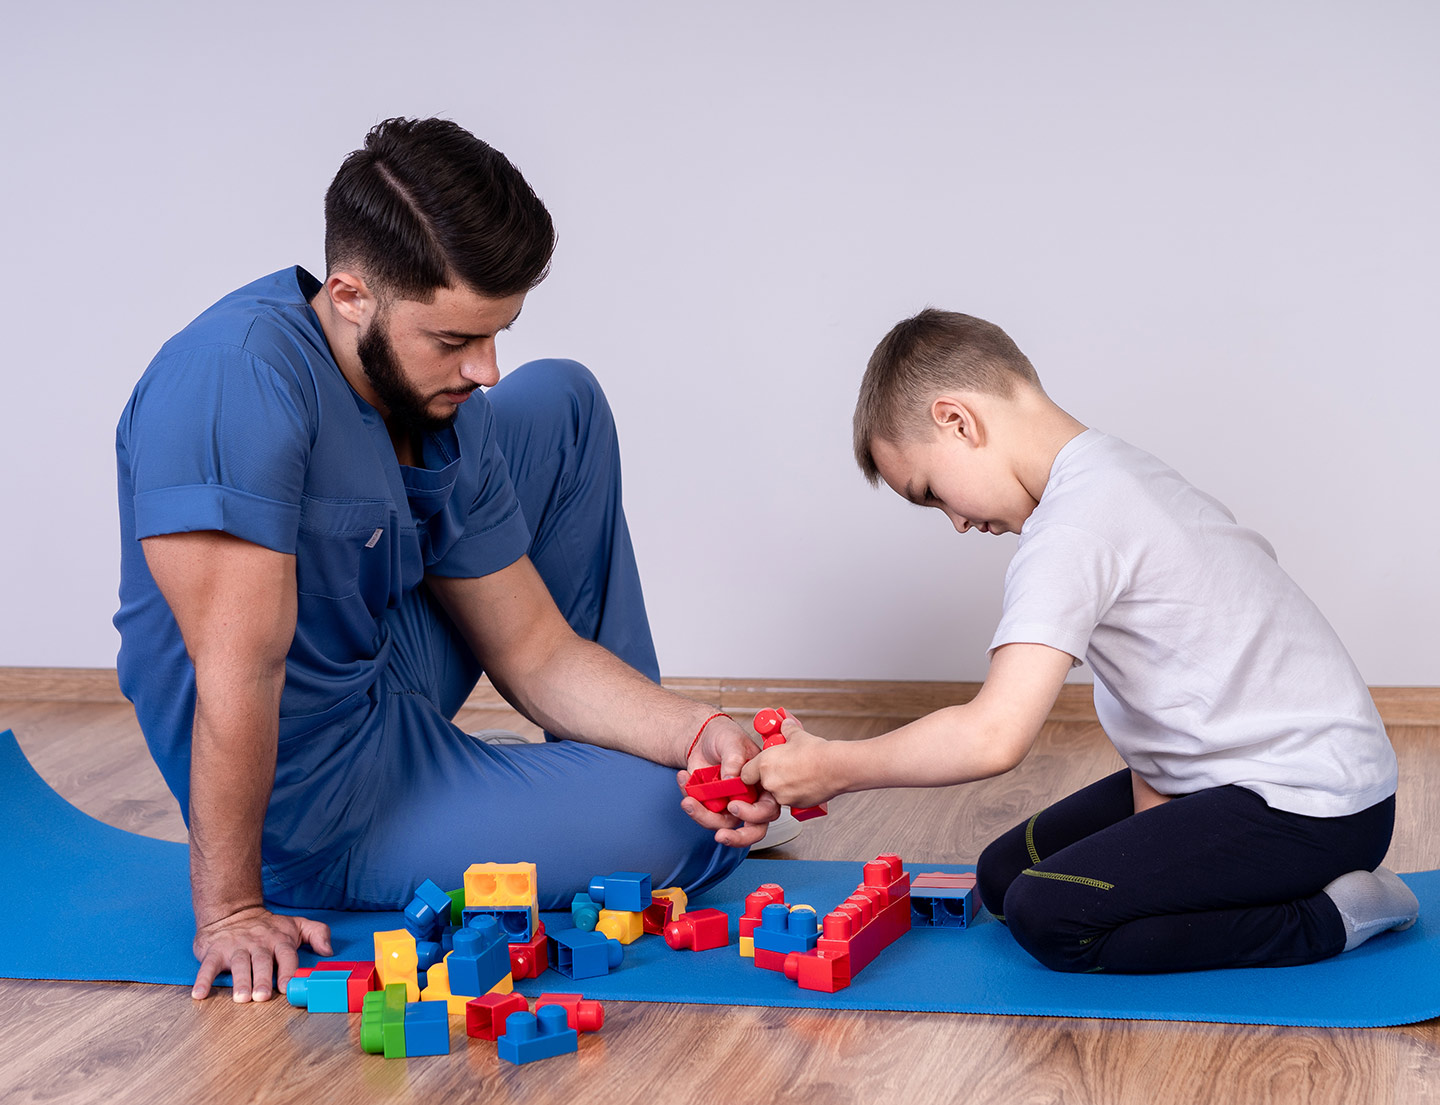 staff member and male patient playing with blocks